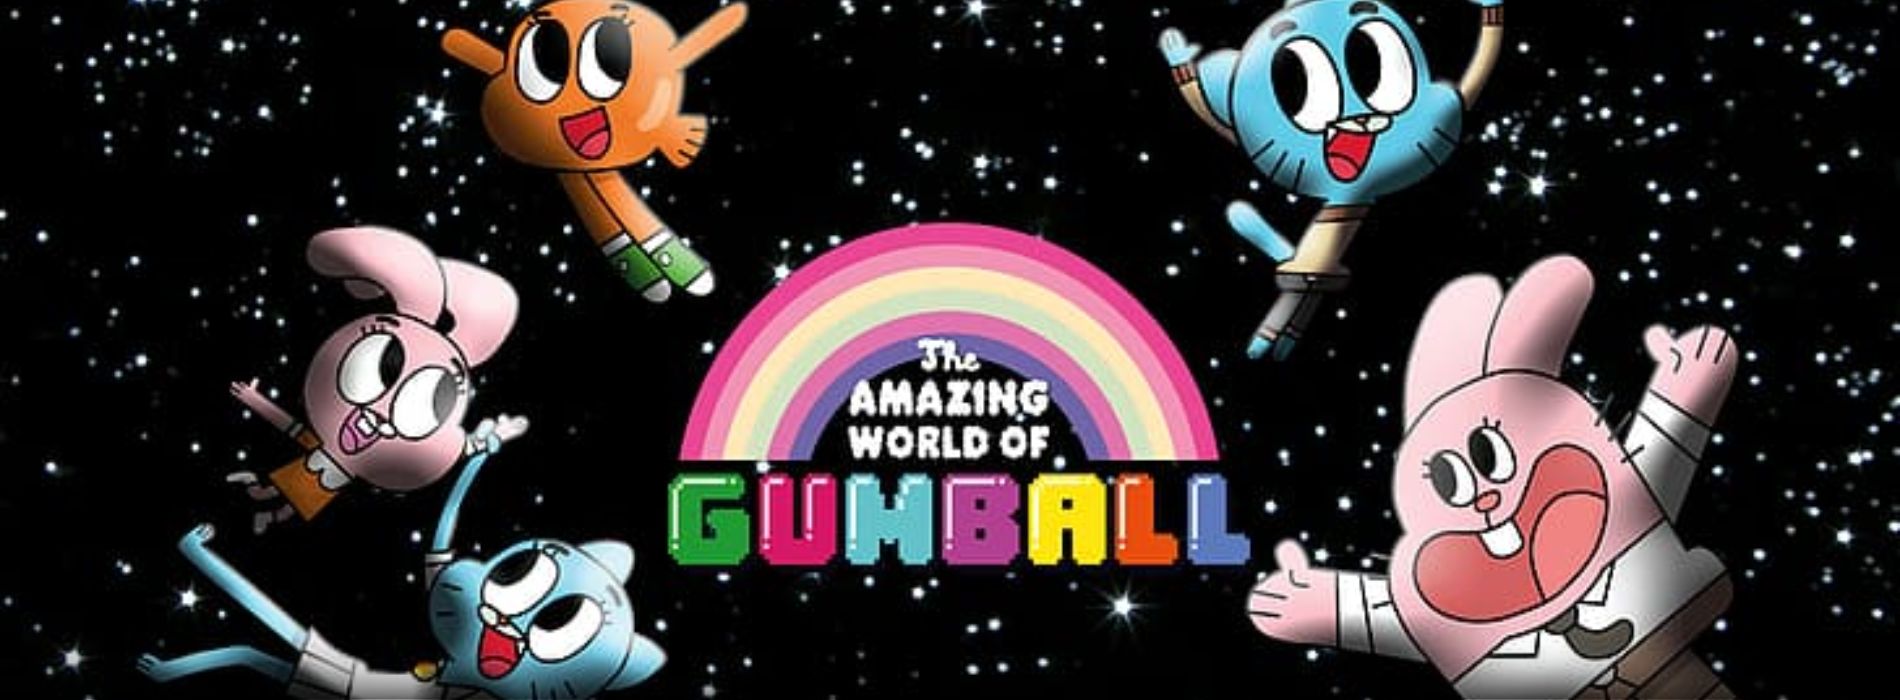 famous-cartoon-cats-Gumball (The Amazing World of Gumball